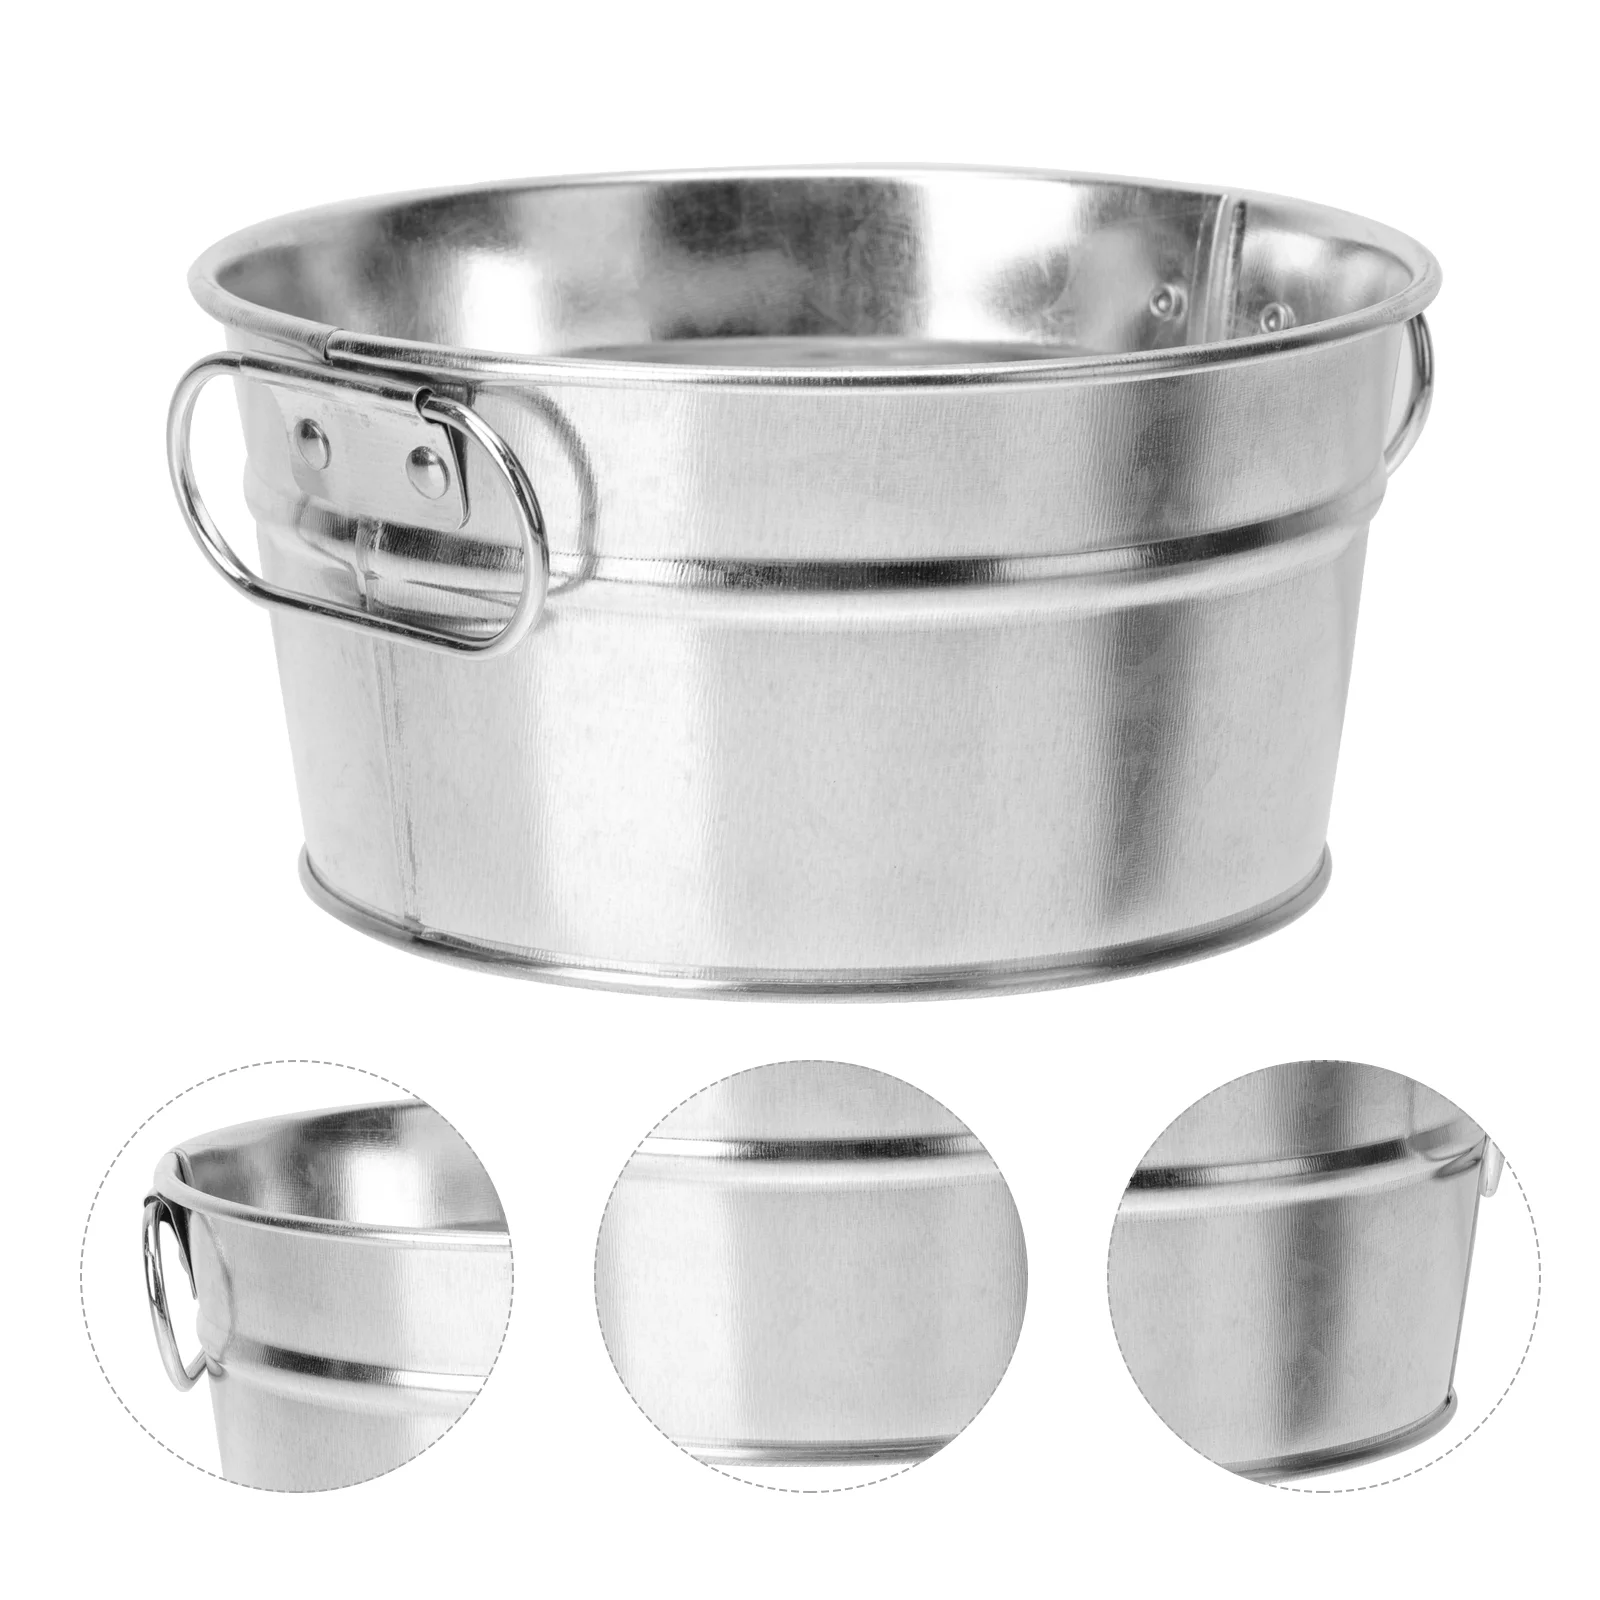 

Seafood Bucket Tableware Containers Snack Chicken Nuggets Buckets Stainless Flatware Steel Storage French Fries Ice Planter